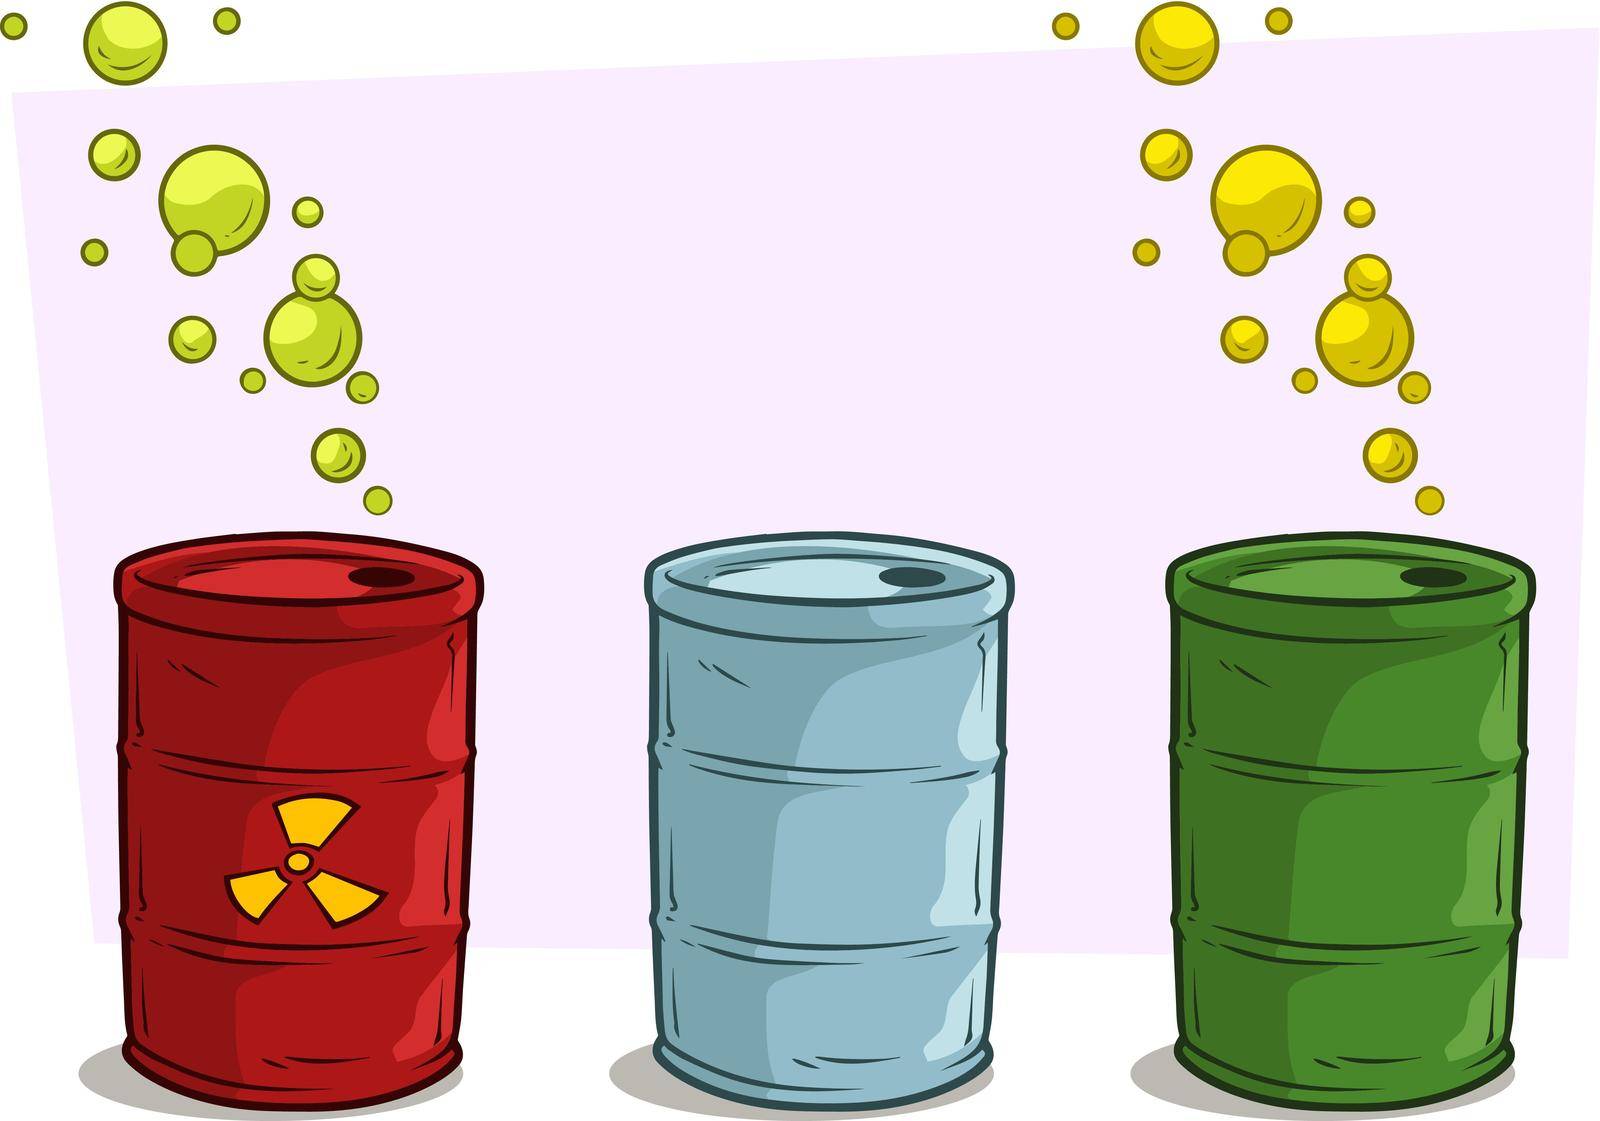 Cartoon coloful barrels with yellow radiation sign by GB_Art